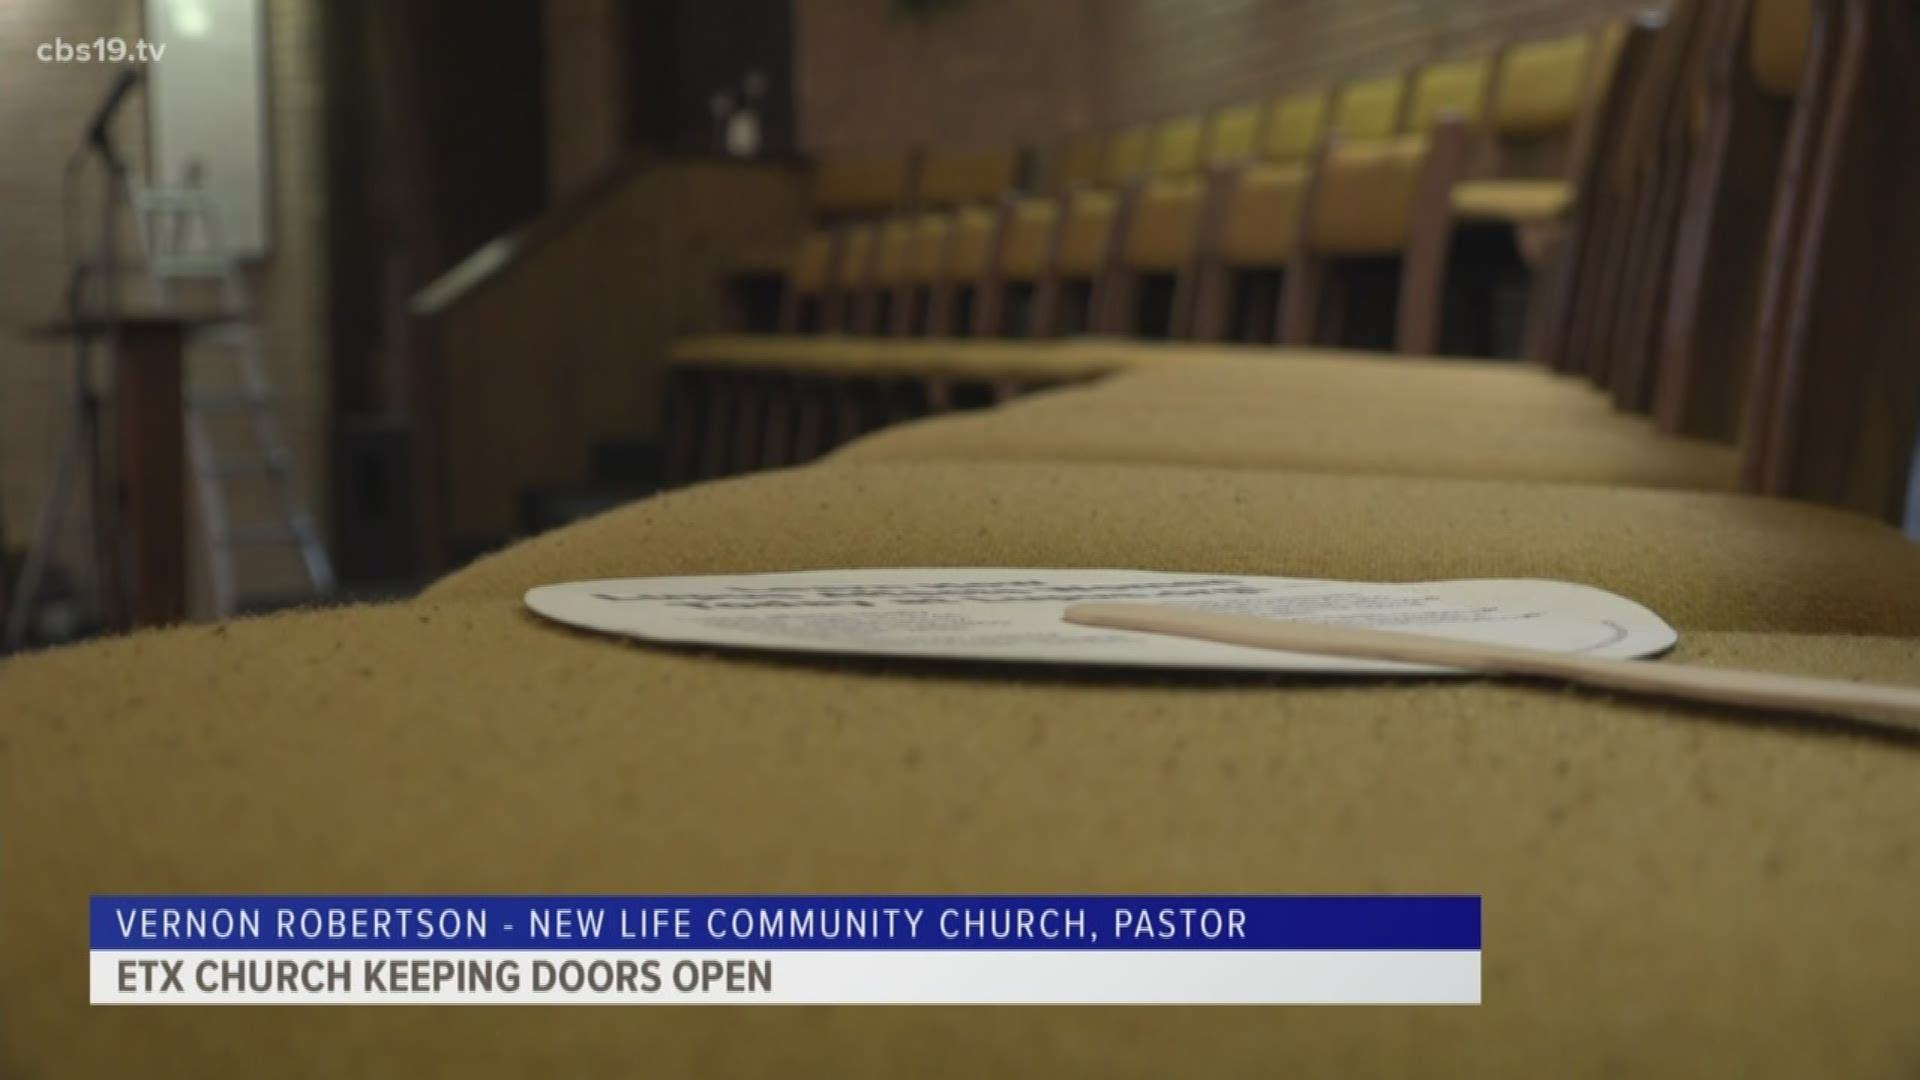 An East Texas church is keeping its doors open despite the COVID-19 pandemic.